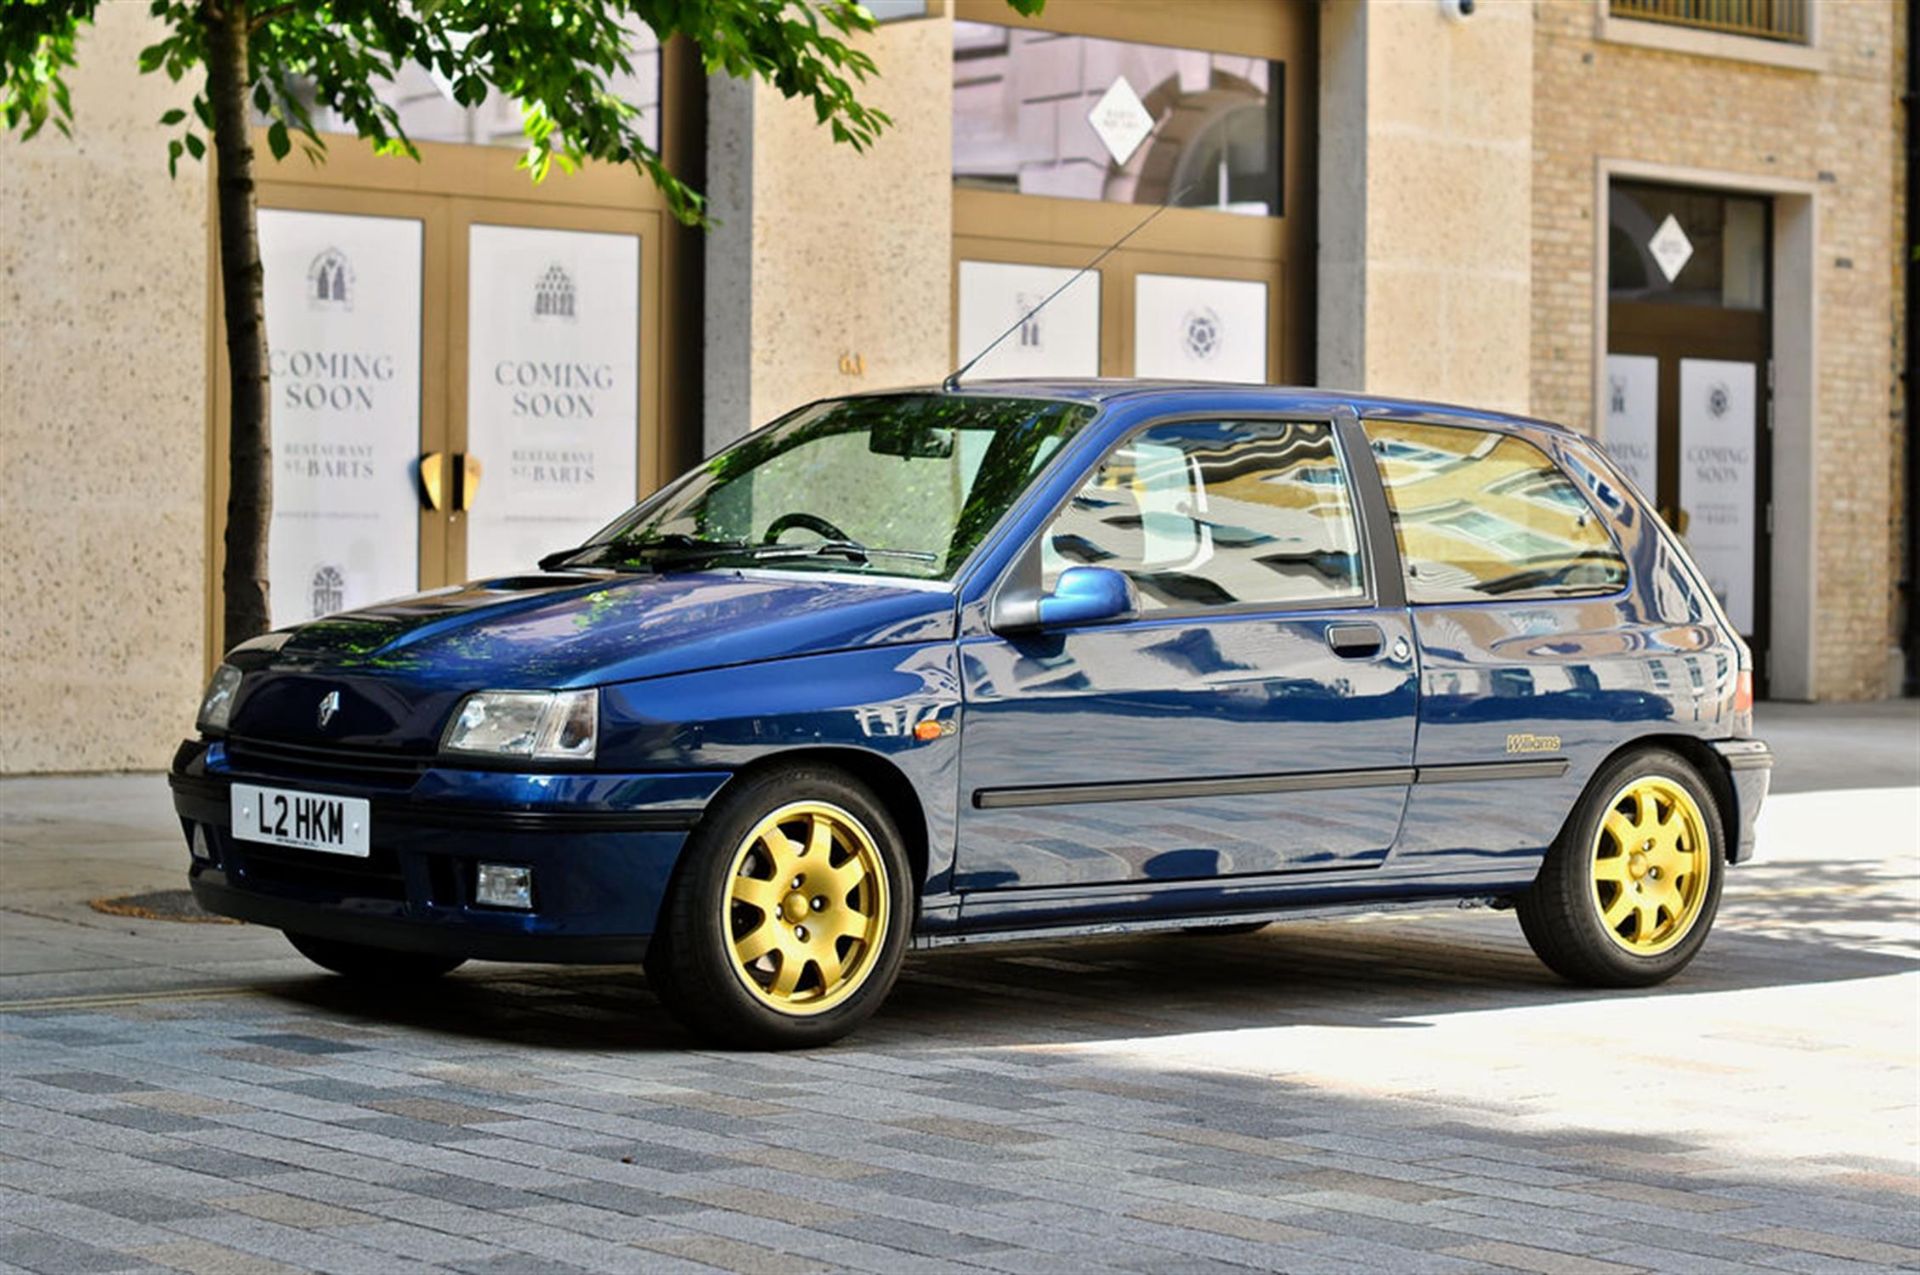 1994 Renault Clio Williams (Phase One) #0180 - Image 9 of 10